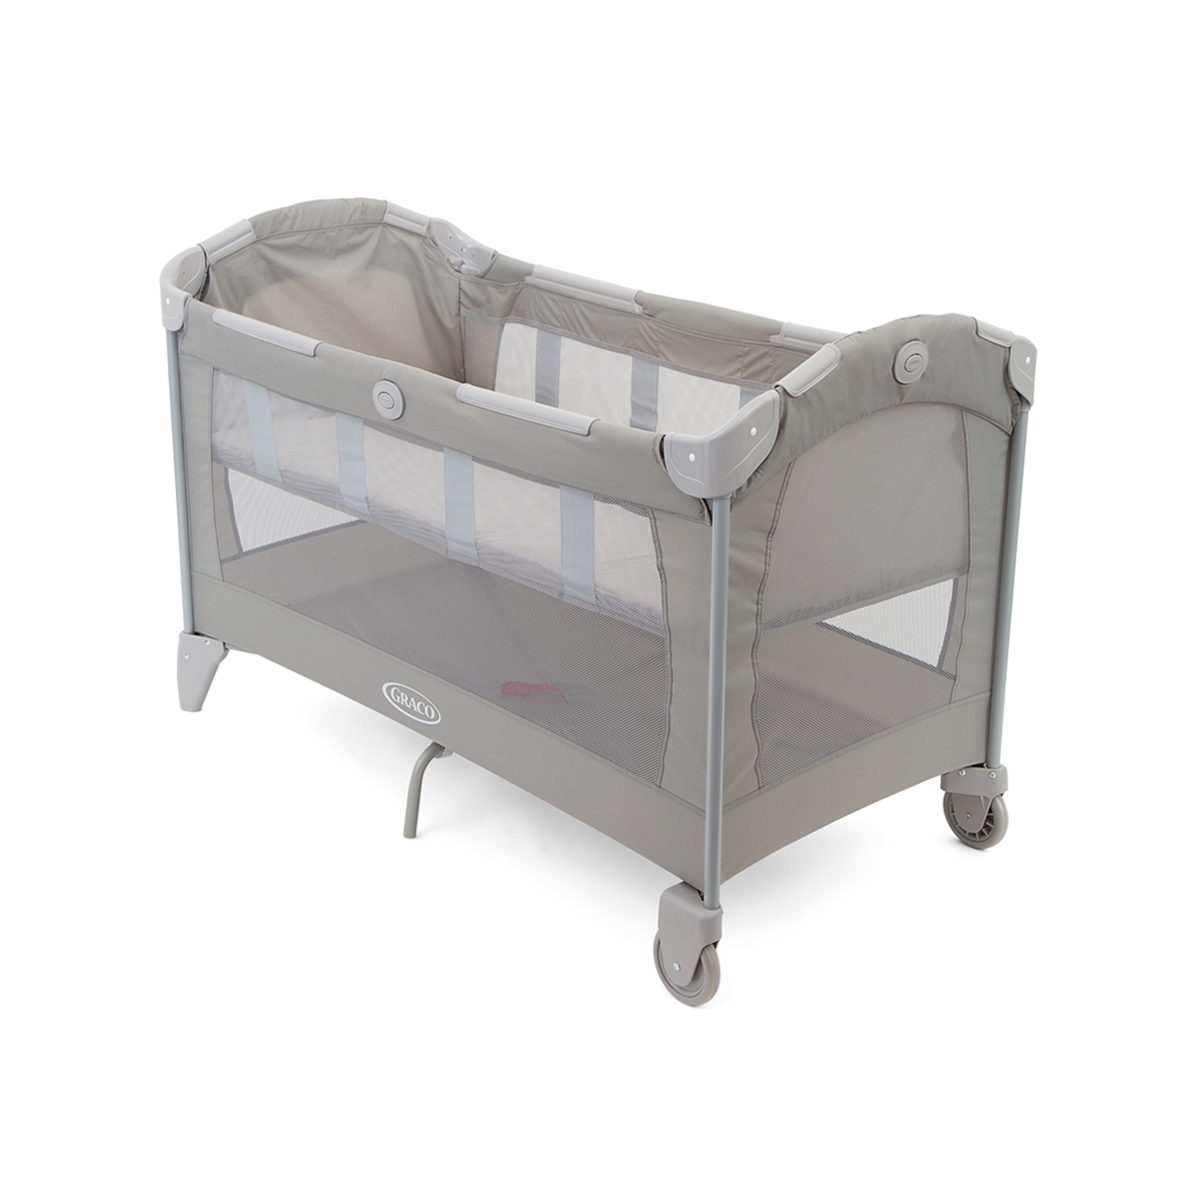 Graco Roll a Bed - Trois quarts d'angle